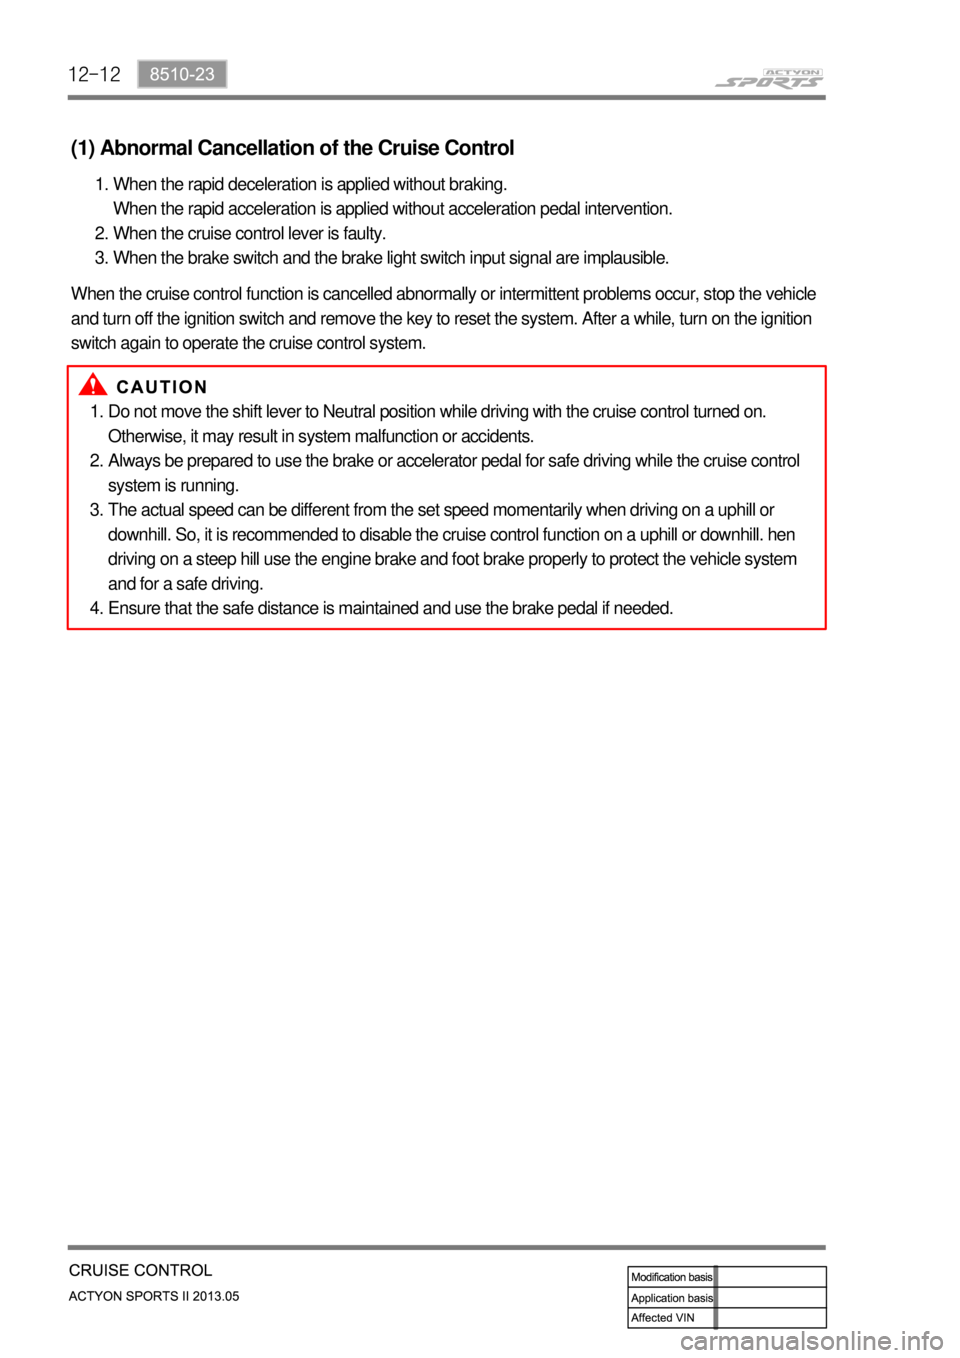 SSANGYONG NEW ACTYON SPORTS 2013  Service Manual 12-12
Do not move the shift lever to Neutral position while driving with the cruise control turned on. 
Otherwise, it may result in system malfunction or accidents.
Always be prepared to use the brake